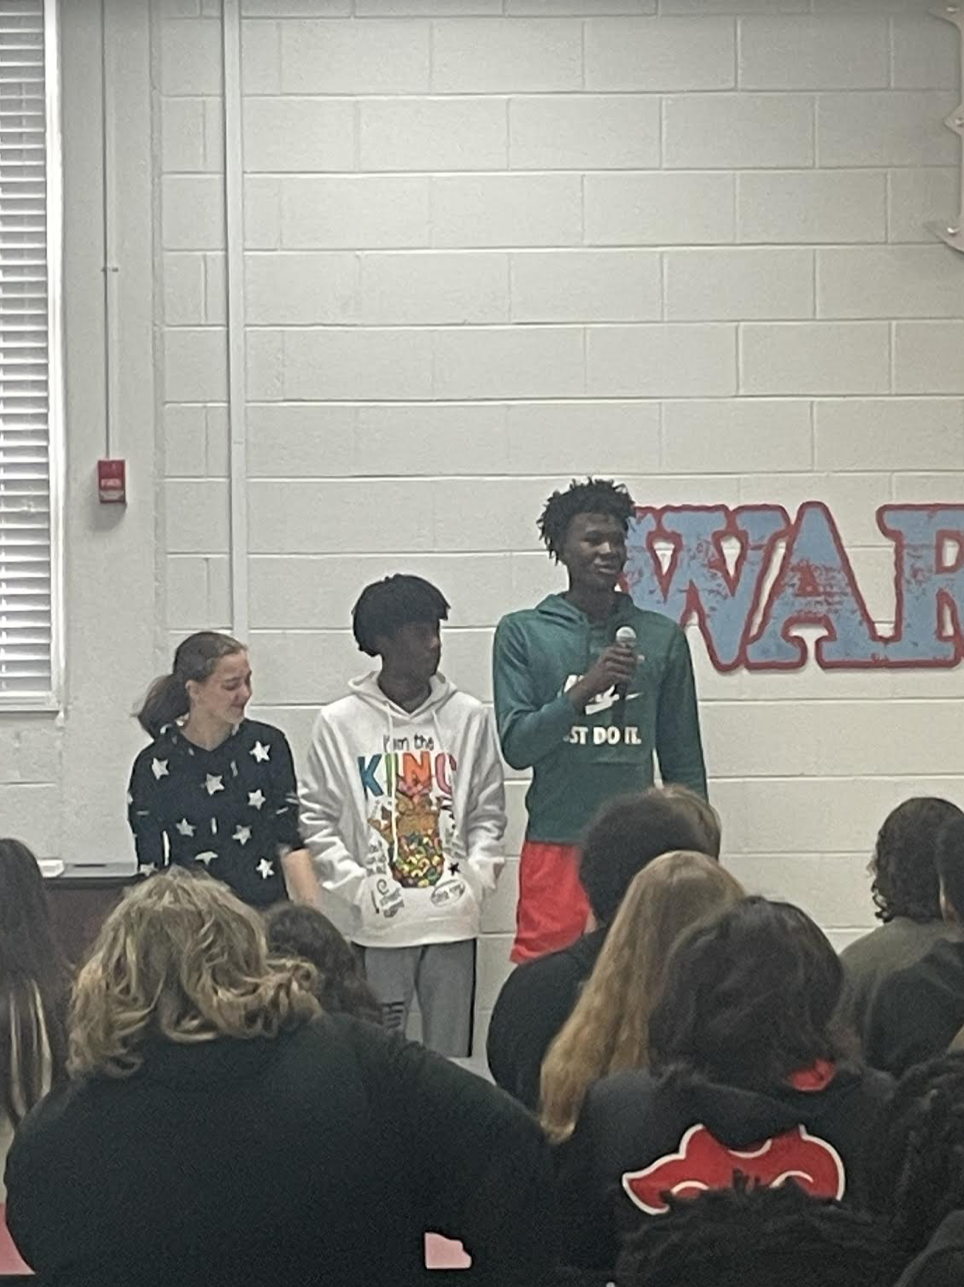 9th grade students speak about their experience